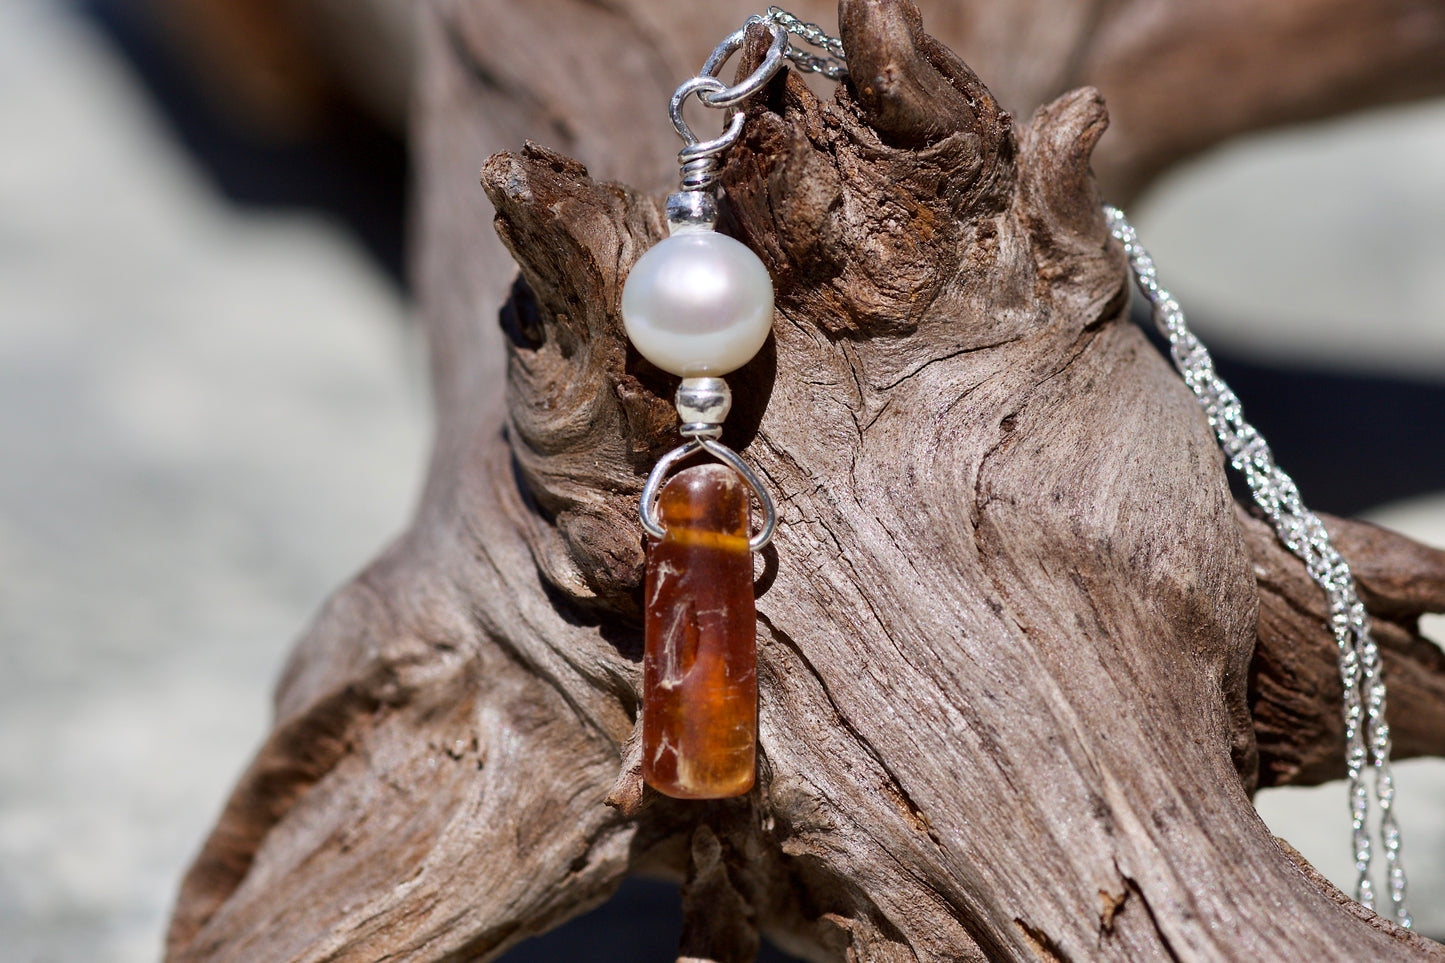 Freshwater Pearl, Orange Kyanite, and Sterling Silver Pendant Necklace